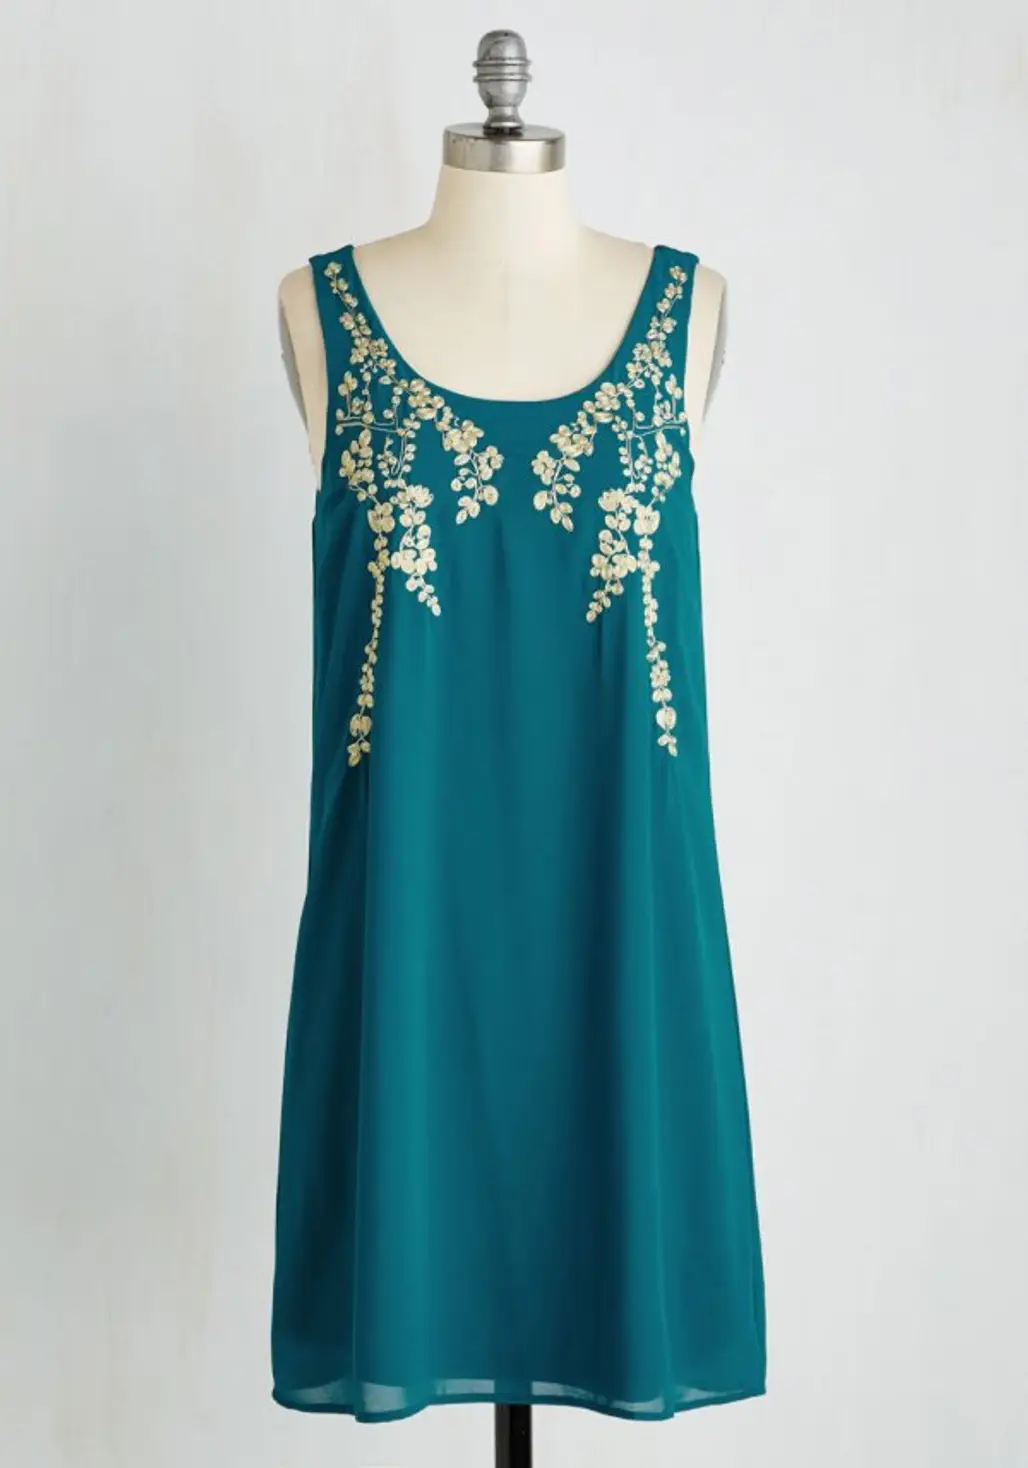 Everything Exquisite Dress in Teal